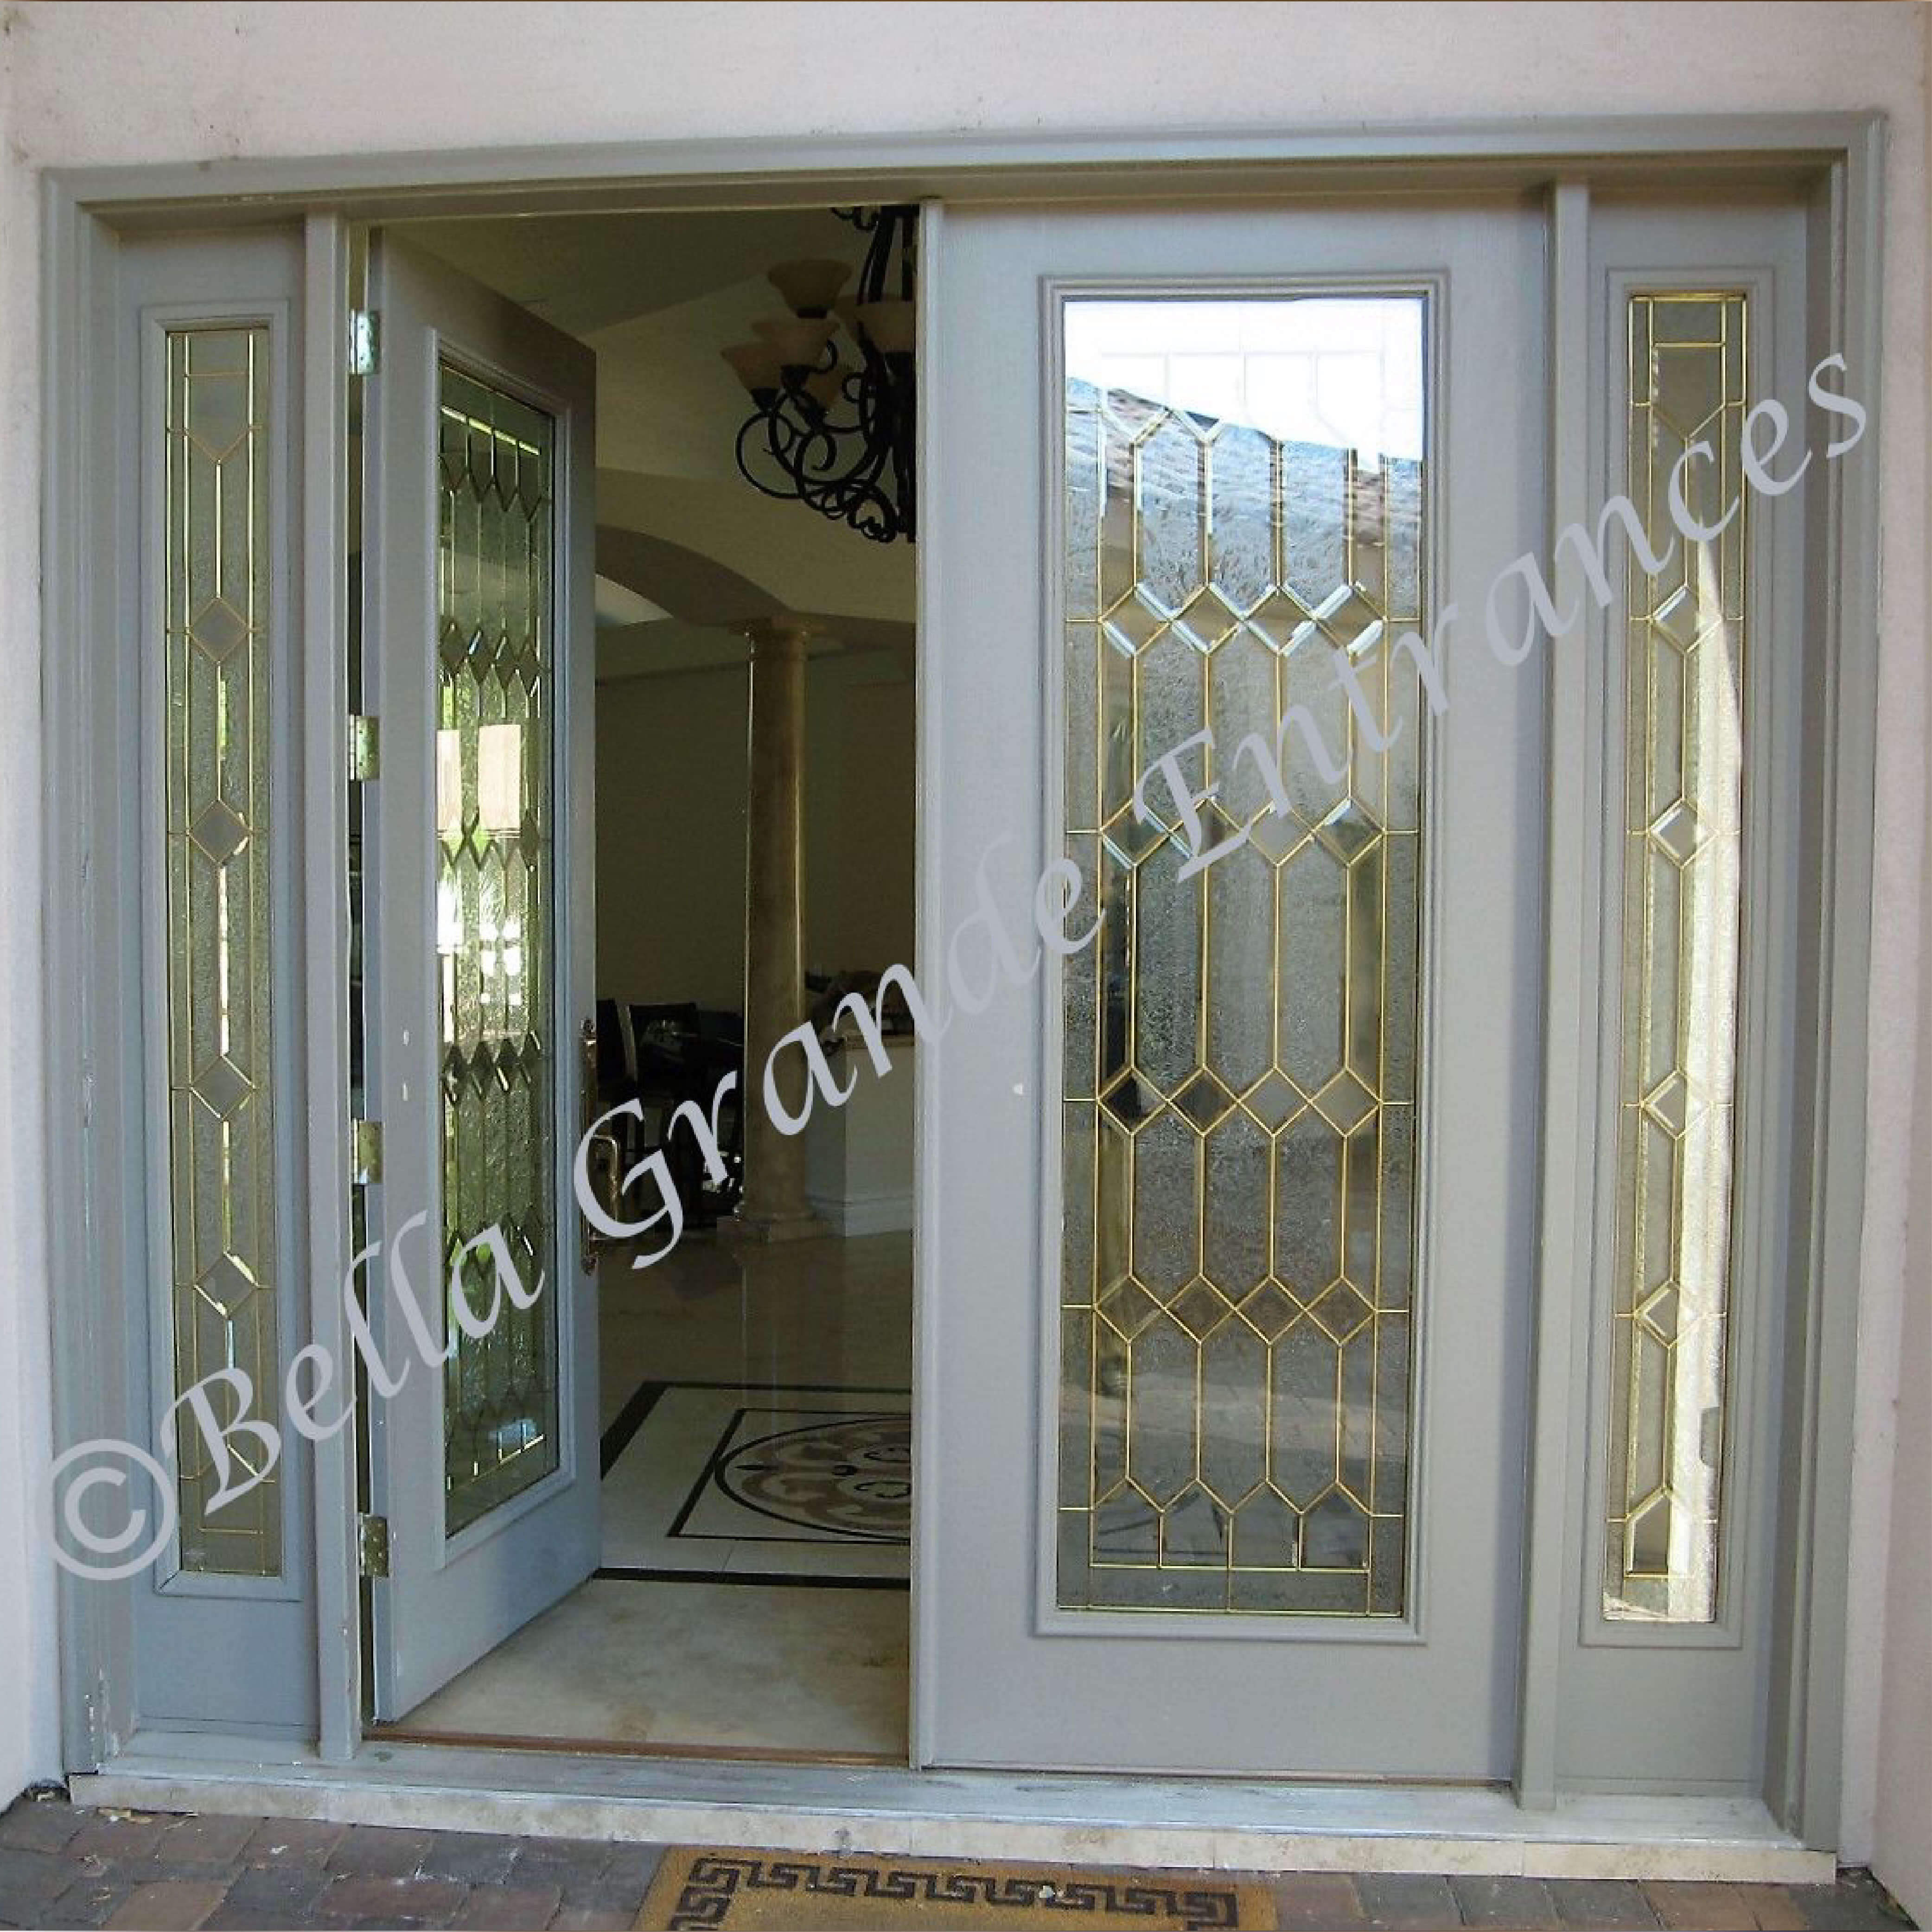 Before installing the Bella Grande Entrances Contemporary Iron Model-CT-12 door, there is a white wooden door in place.